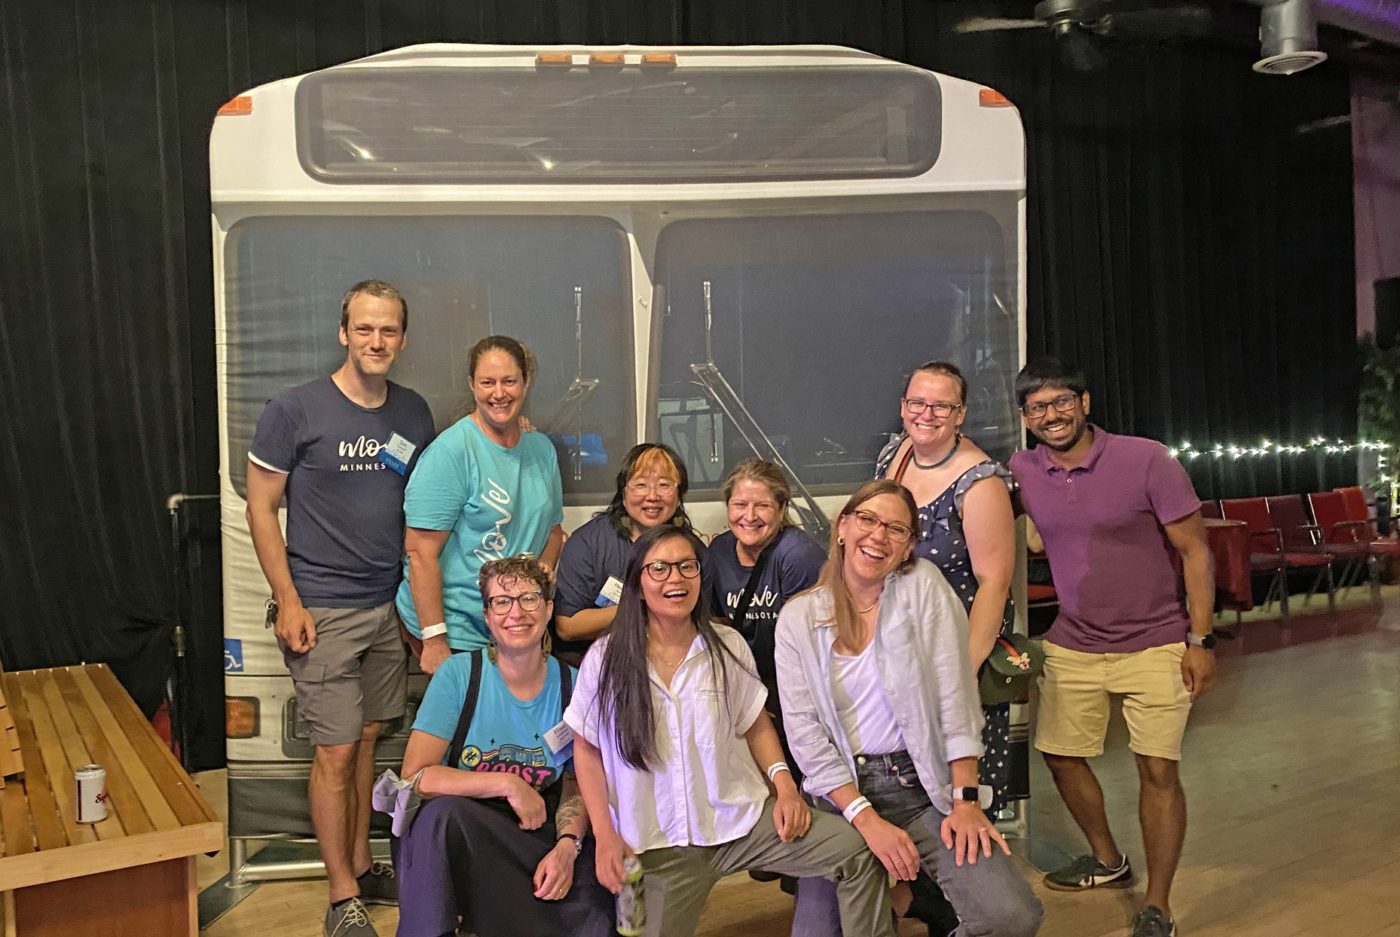 The Move Minnesota staff smiling and posing in front of a life-sized banner of a Metro Transit bus